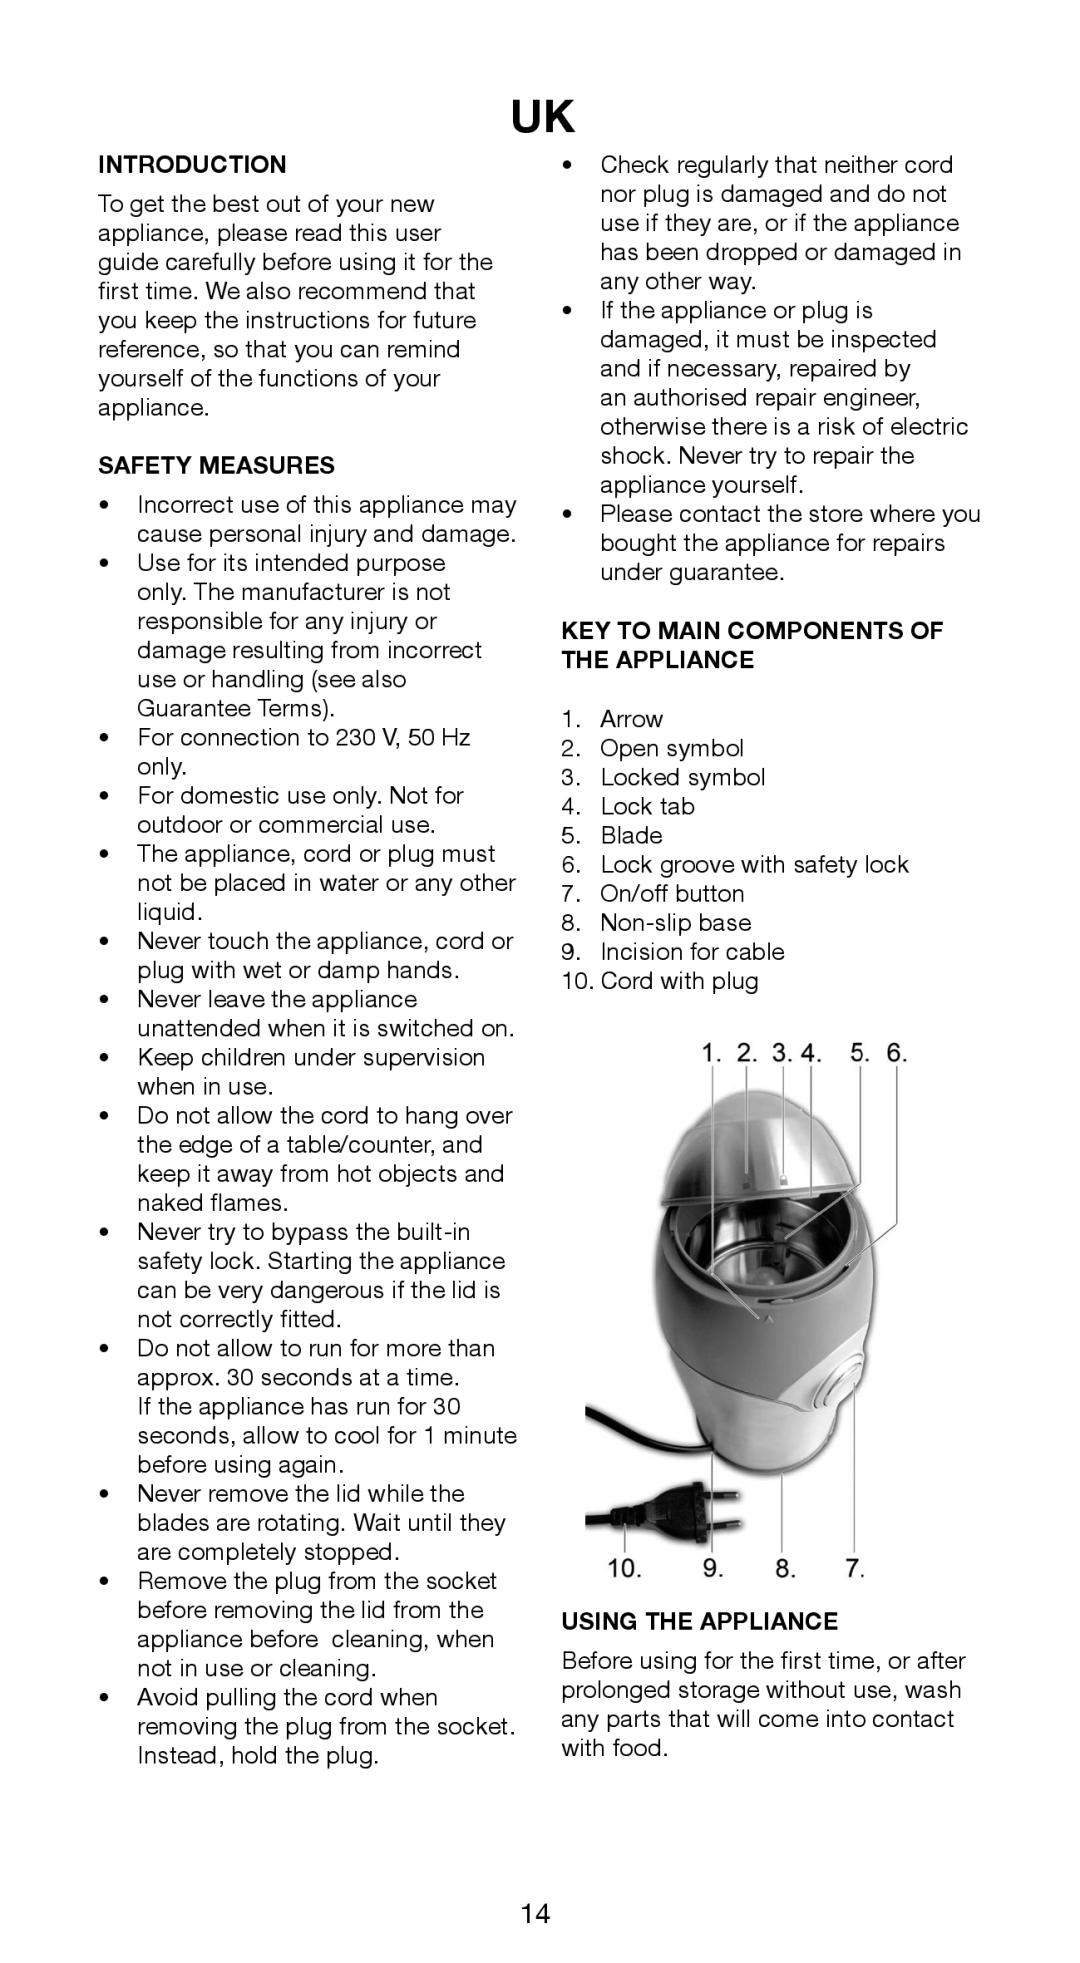 Butler 645-141 manual Introduction, Safety Measures, Key To Main Components Of The Appliance, Using The Appliance 